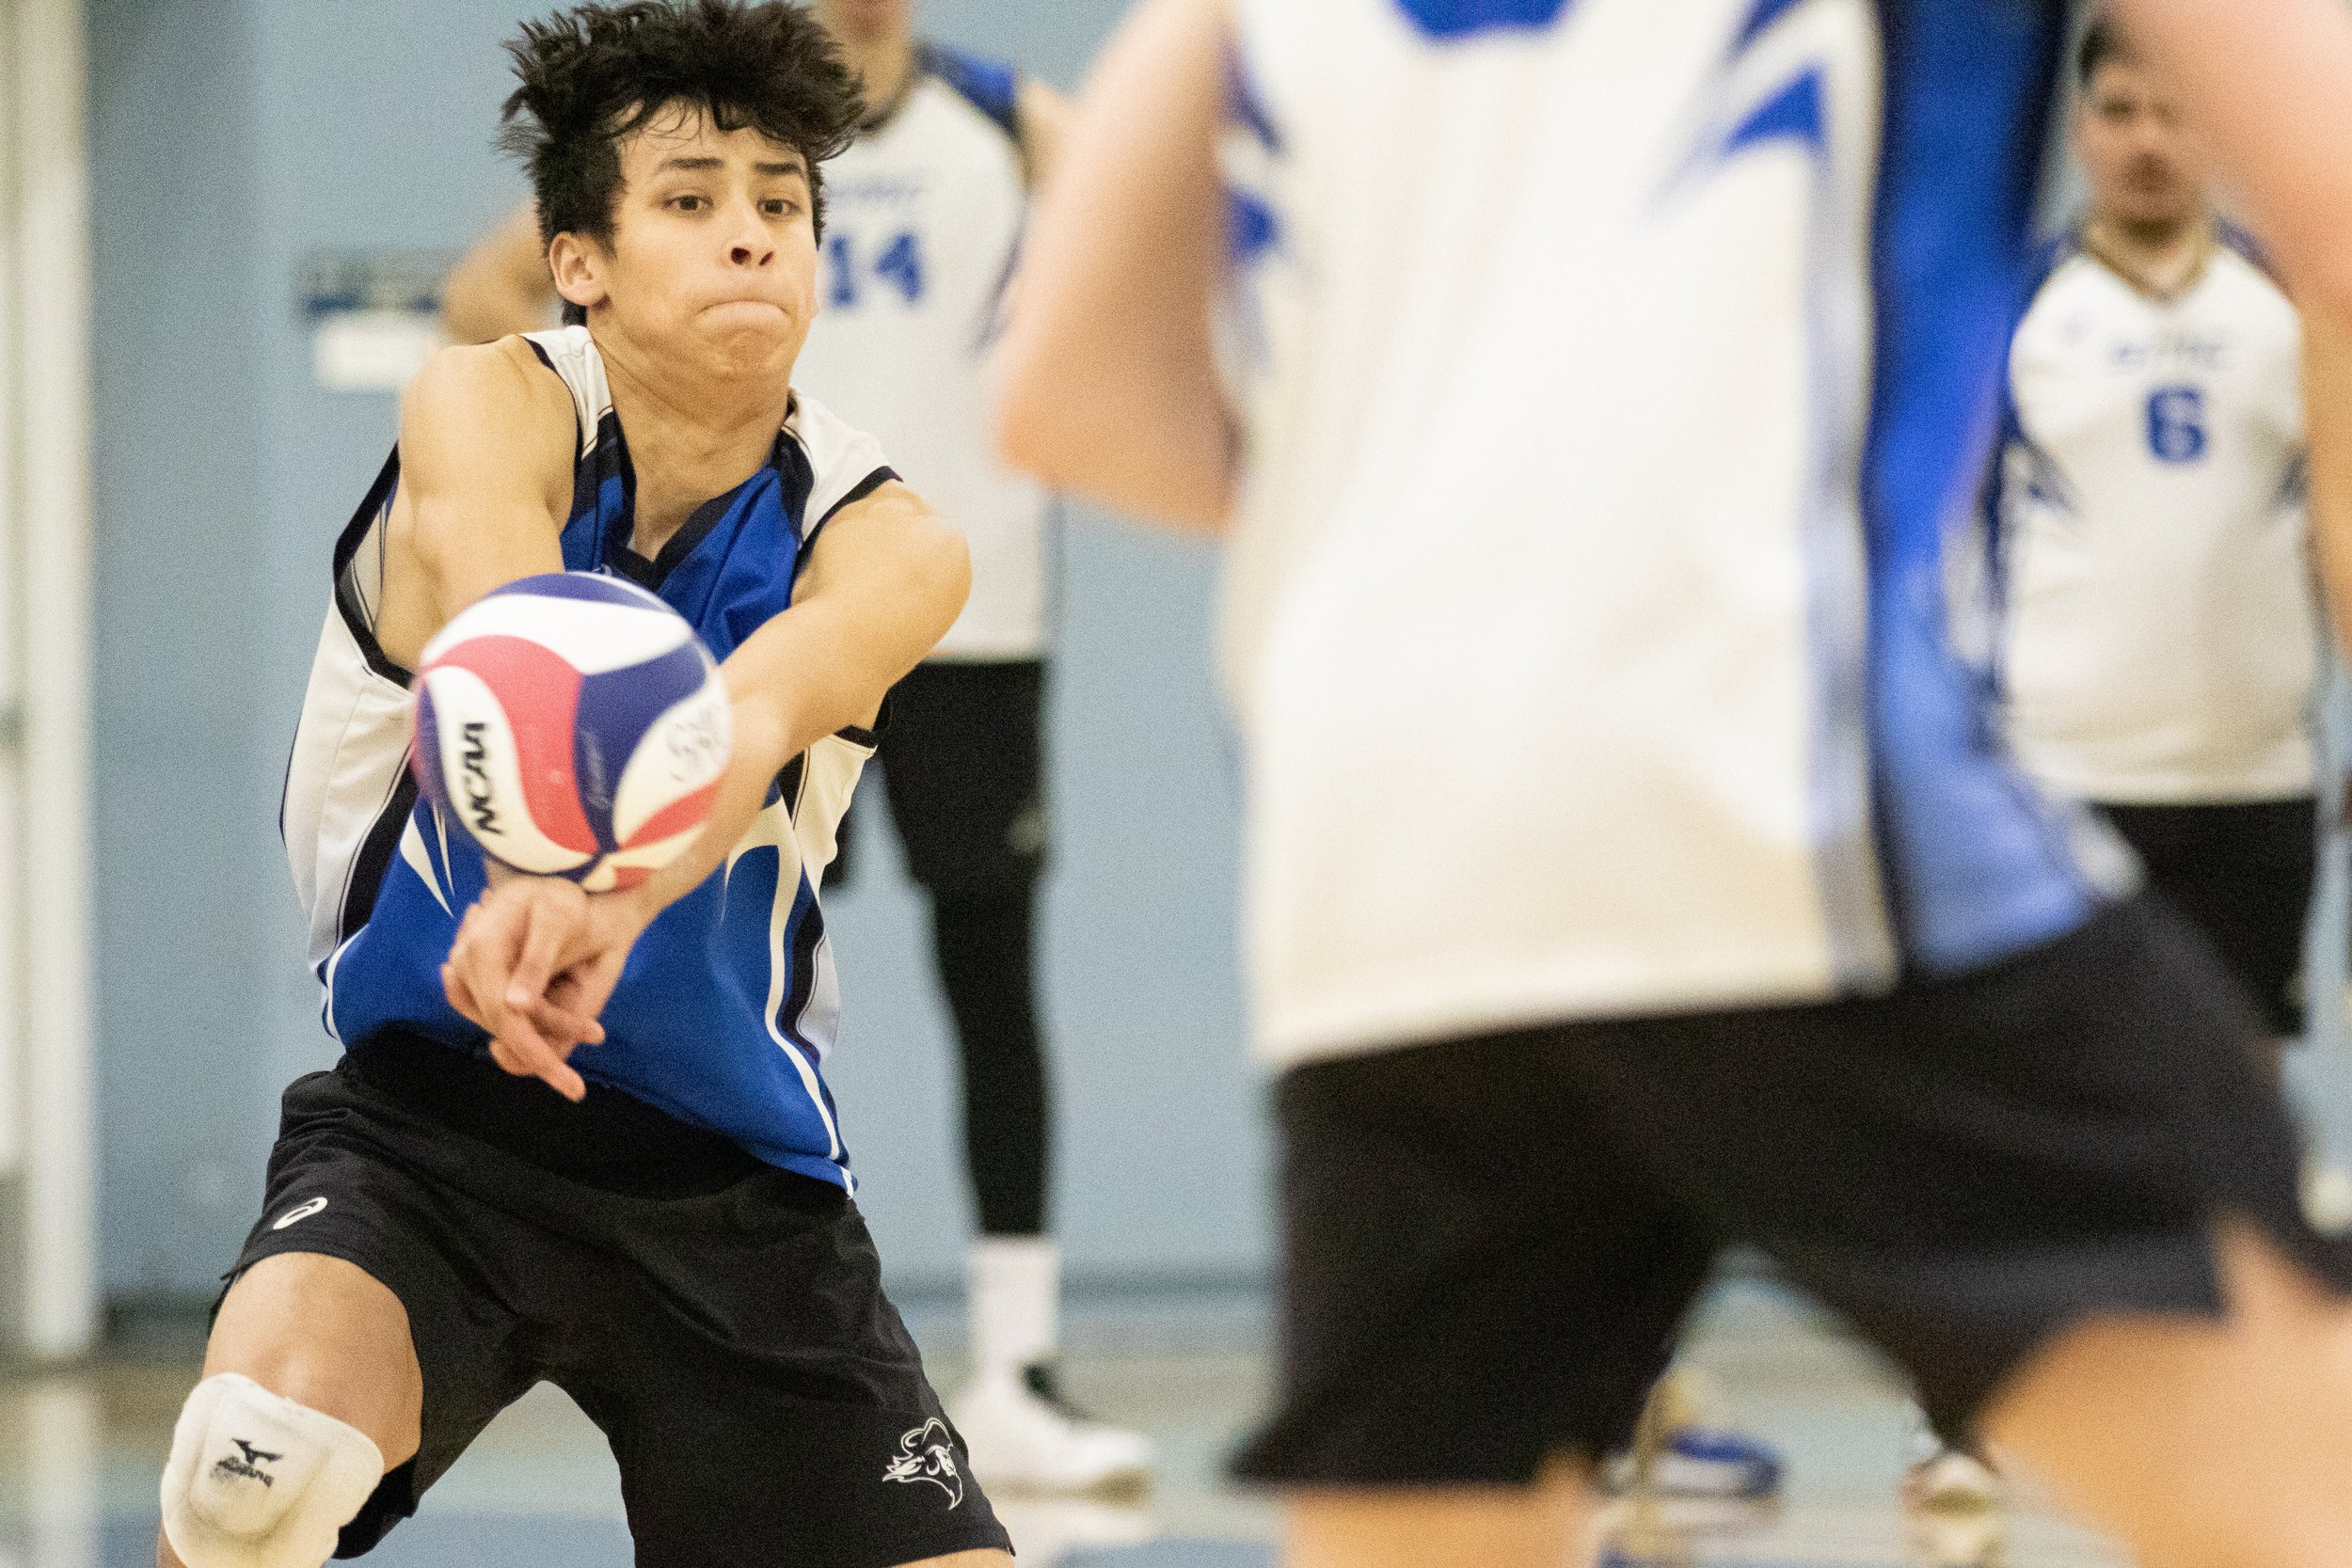  Santa Monica College Corsair libero Javier Castillo (7) hitting the ball after it was served by Long Beach City College Vikings during the first set of a home game in Santa Monica, Calif., on Friday, March 3, 2023. The game resulted in the Corsair's